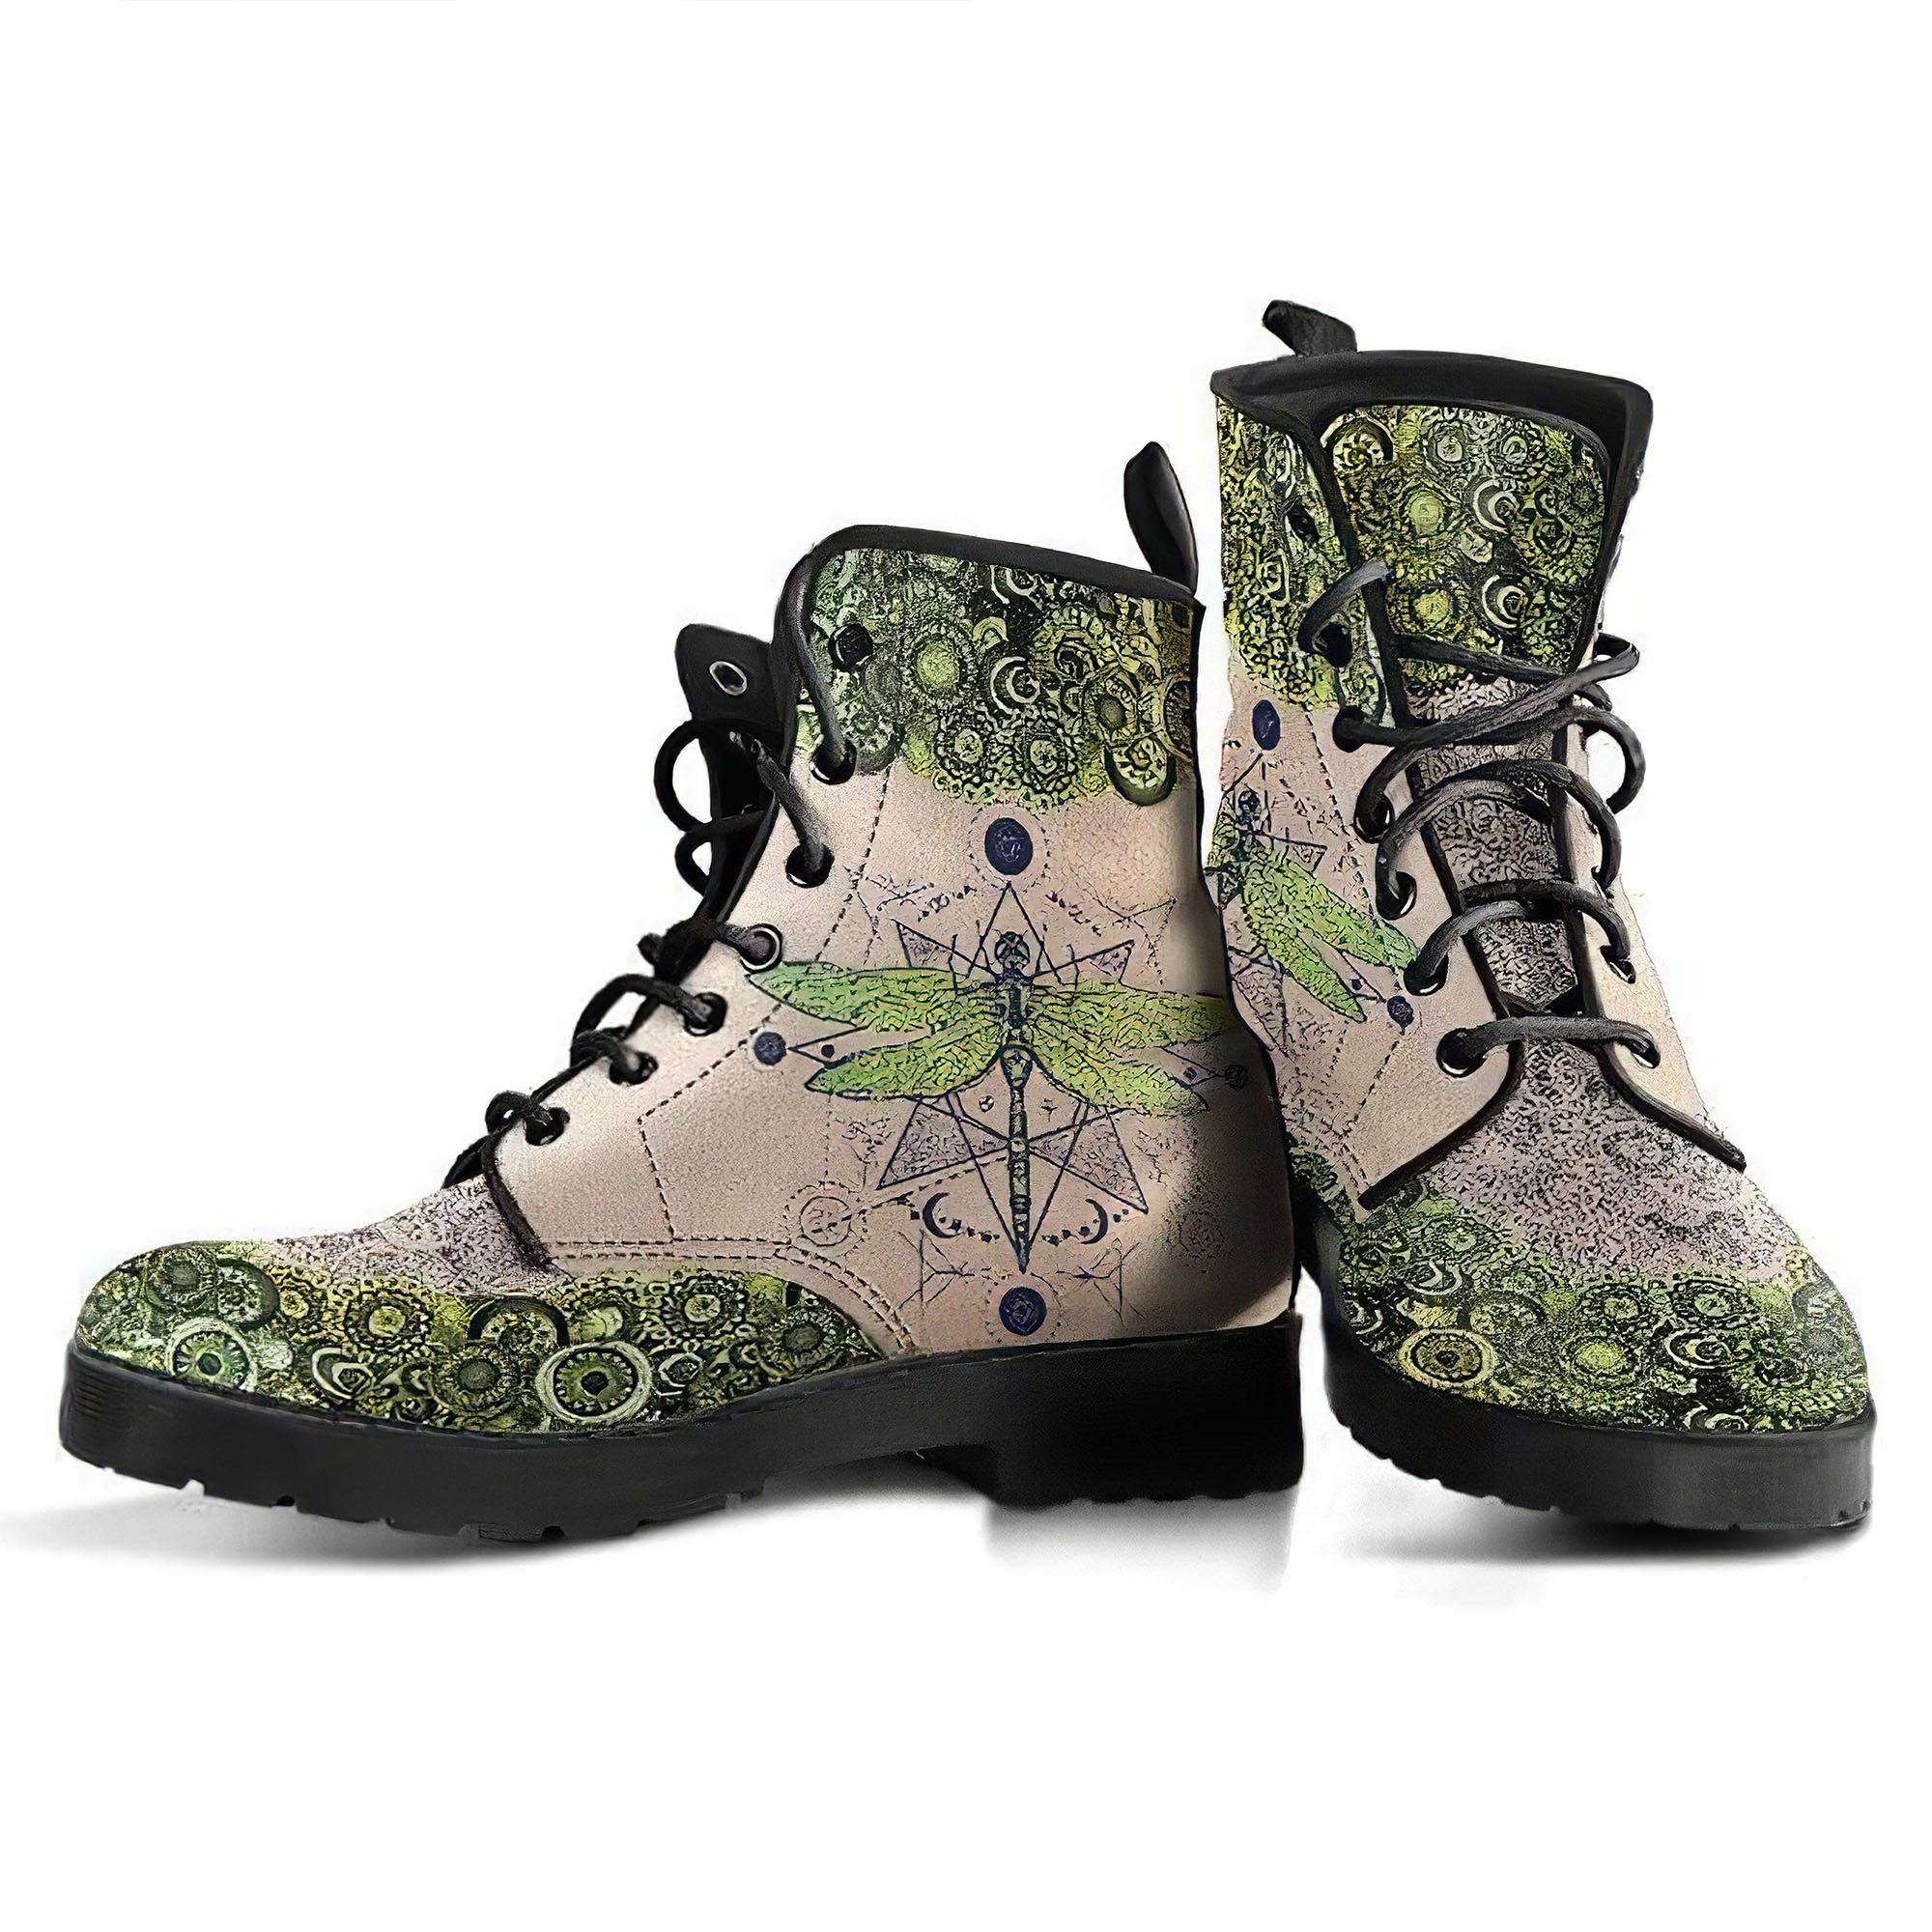 green-dragonfly-handcrafted-boots-gp-main.jpg